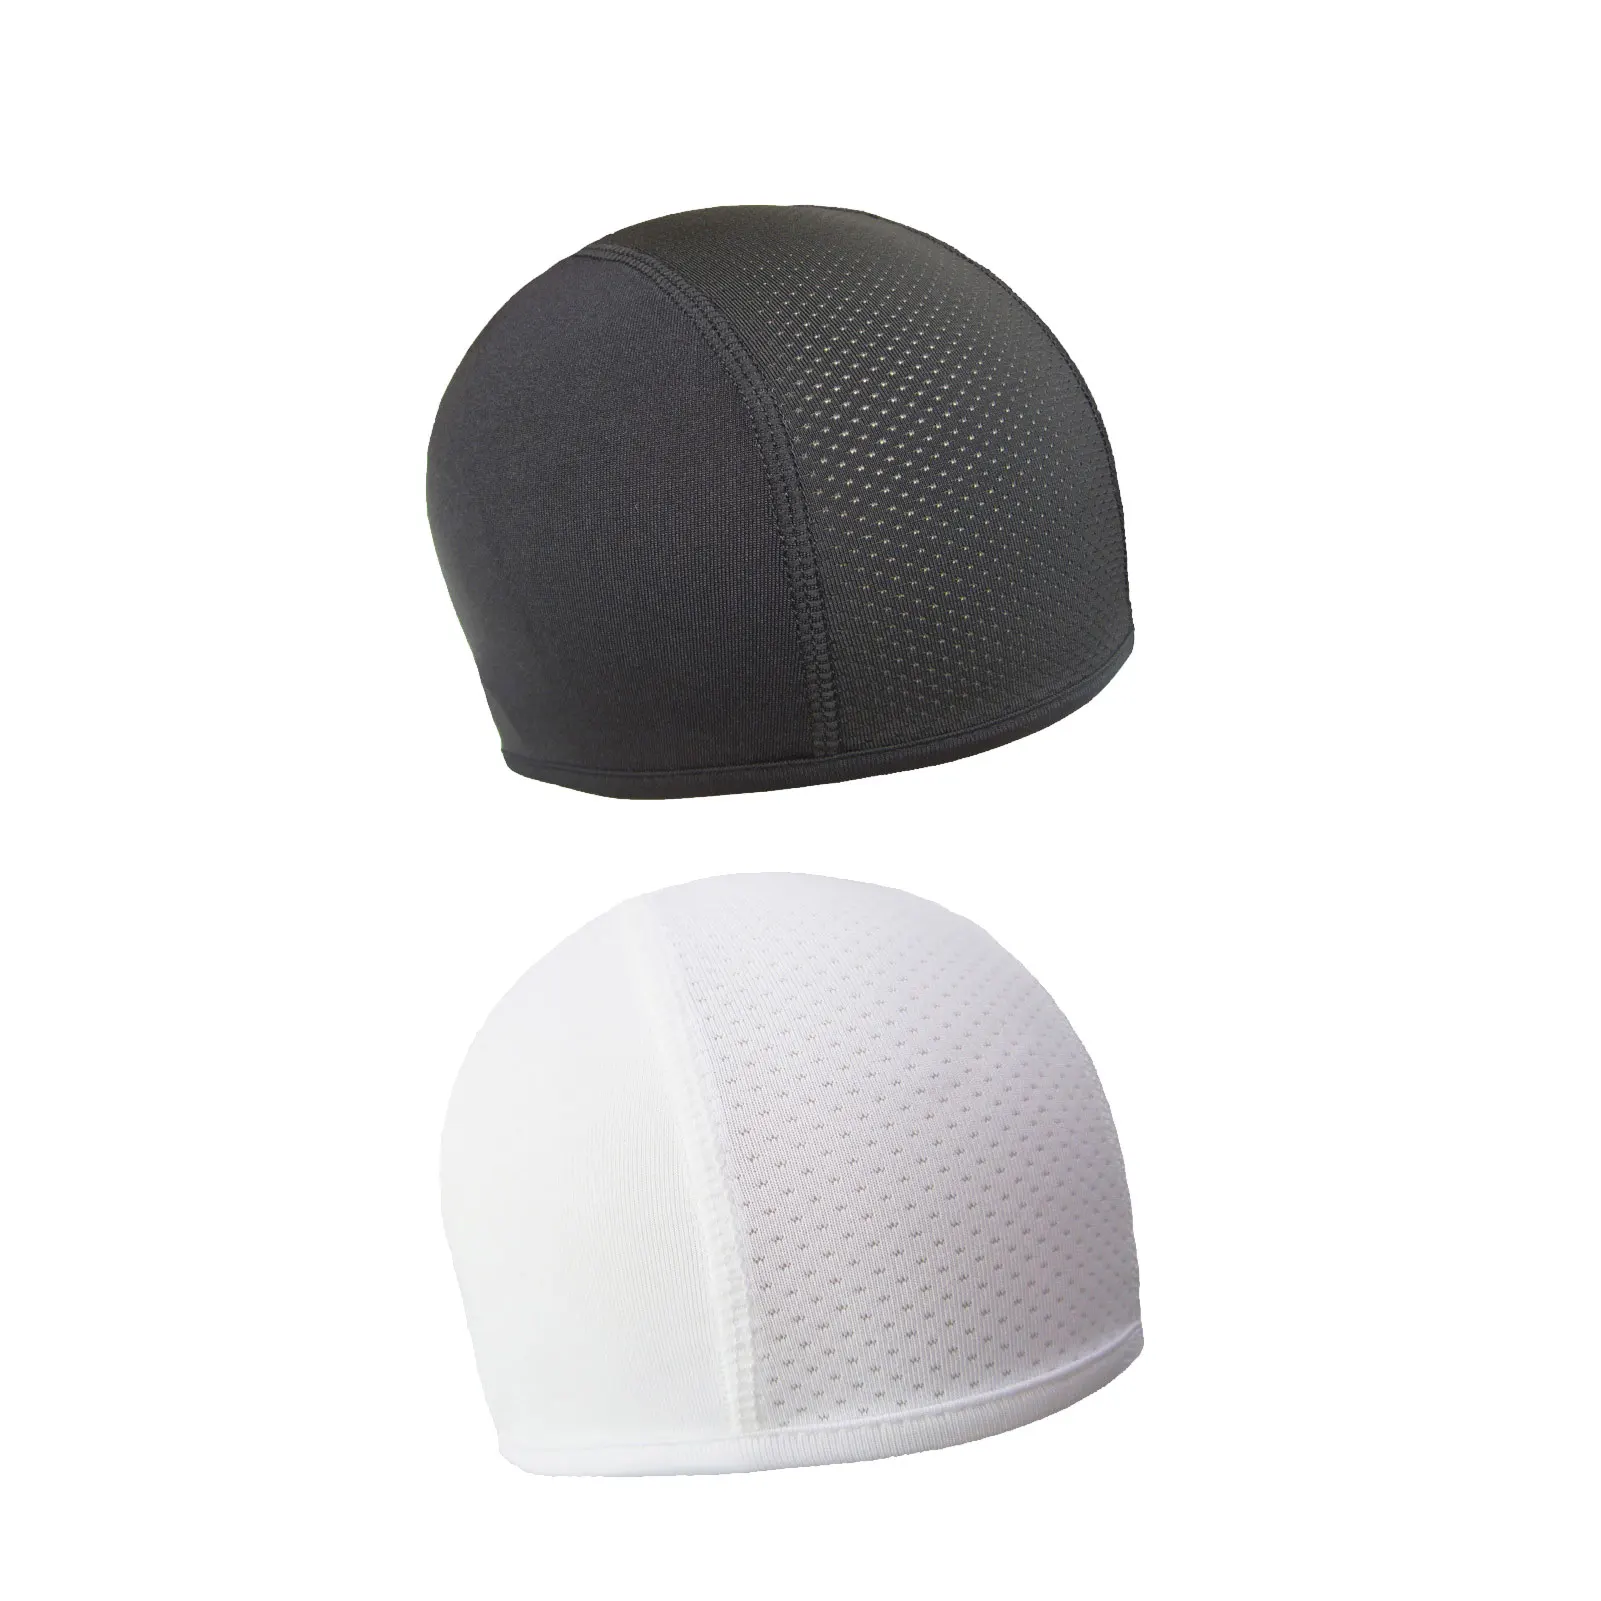 

Outdoor Motorcycle Riding Cap Cap Liner For Men Women Evaporative Cool Technology Cools Instantly When Wet For Under Hats